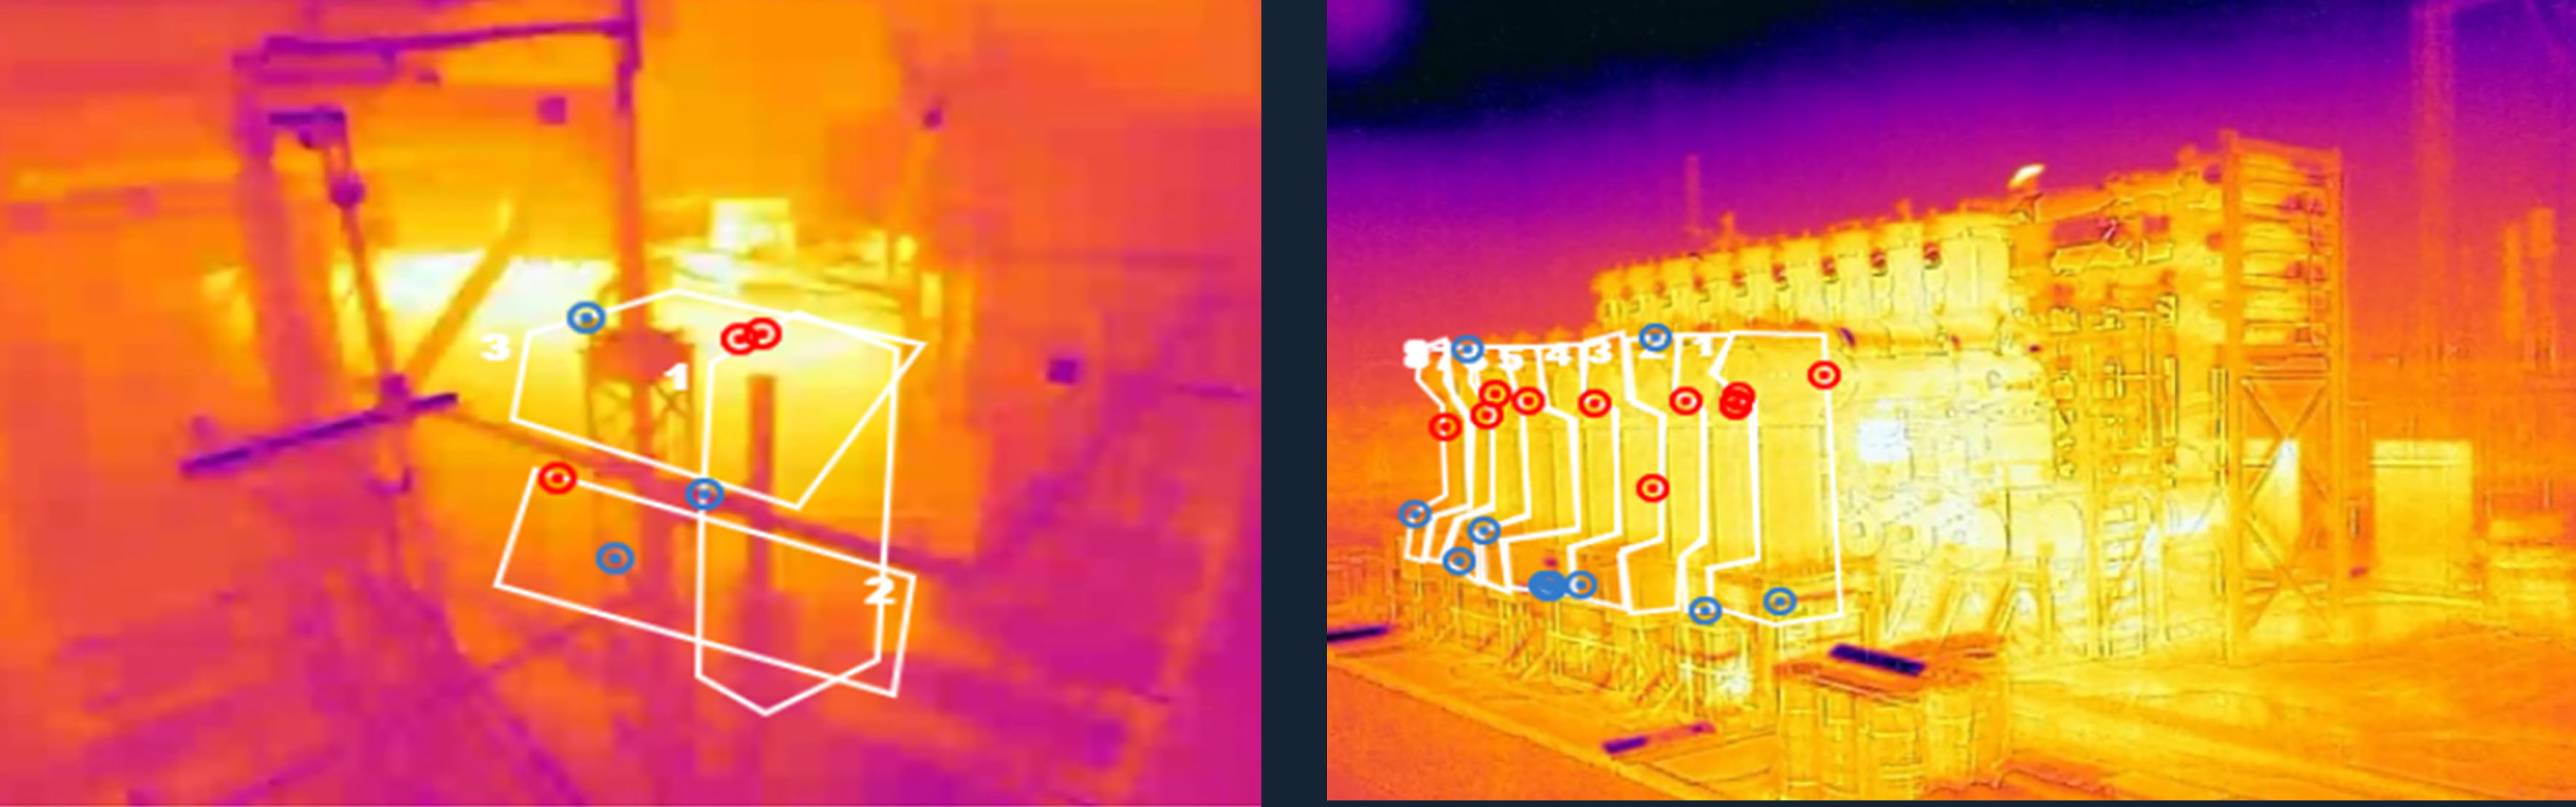 Automated Visual Inspection Software - Thermal images 